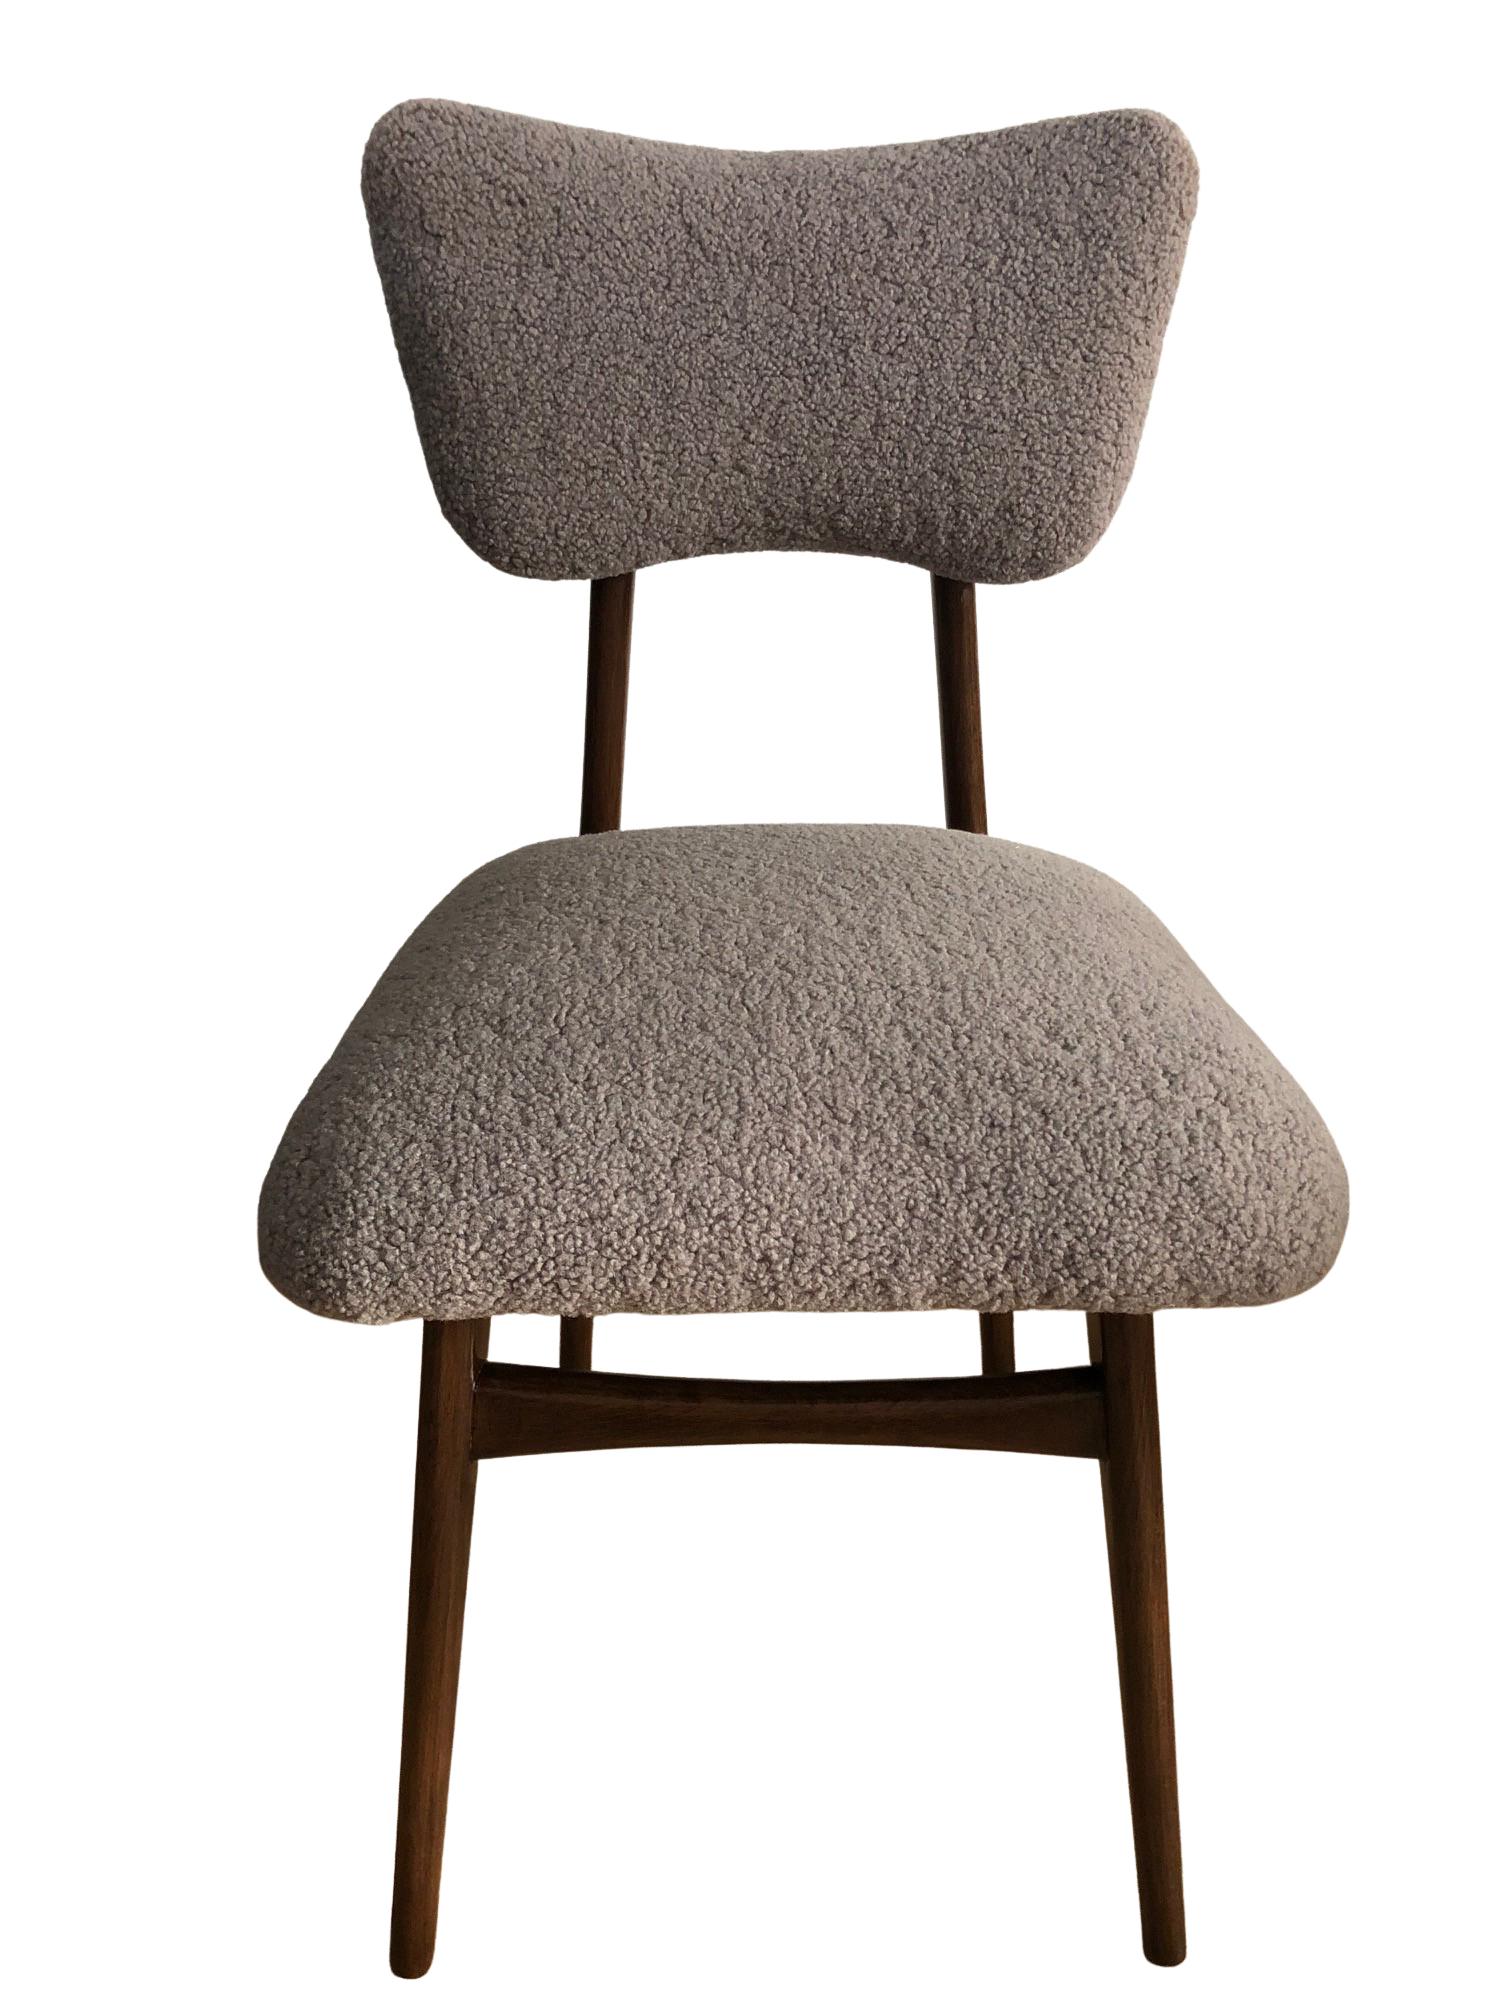 Unique set of six chairs manufactured in Poland in the 1960s, designed by Rajmund Halas. 

The upholstery is made of pleasant to touch boucle textile. It is high quality and durable italian fabric in a warm taupe (light grey light beige) color. The